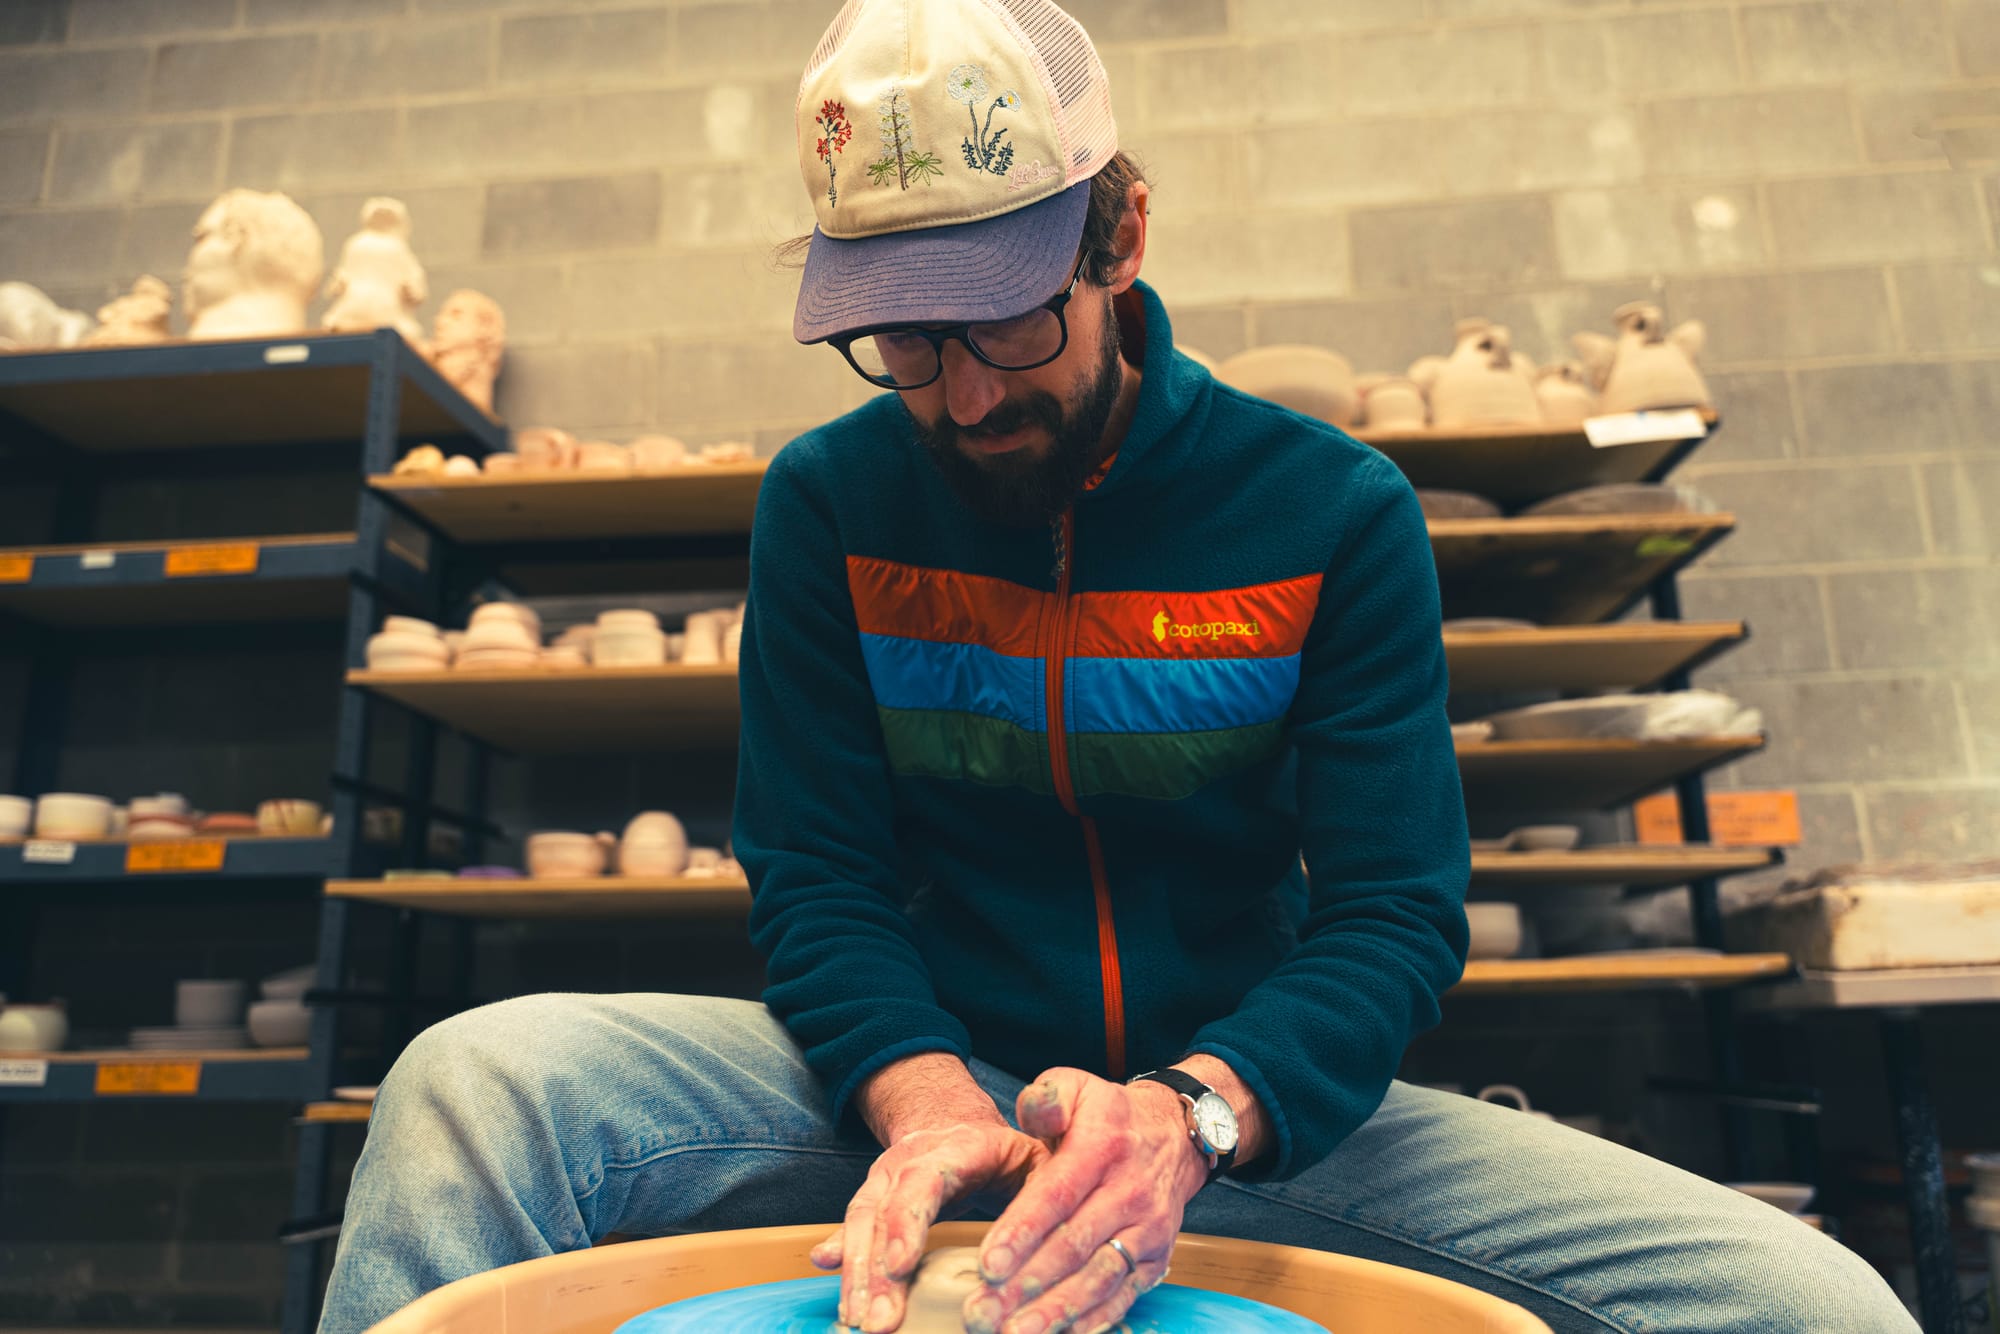 A man with glasses and floral baseball cap sits at a pottery wheel and molds clay